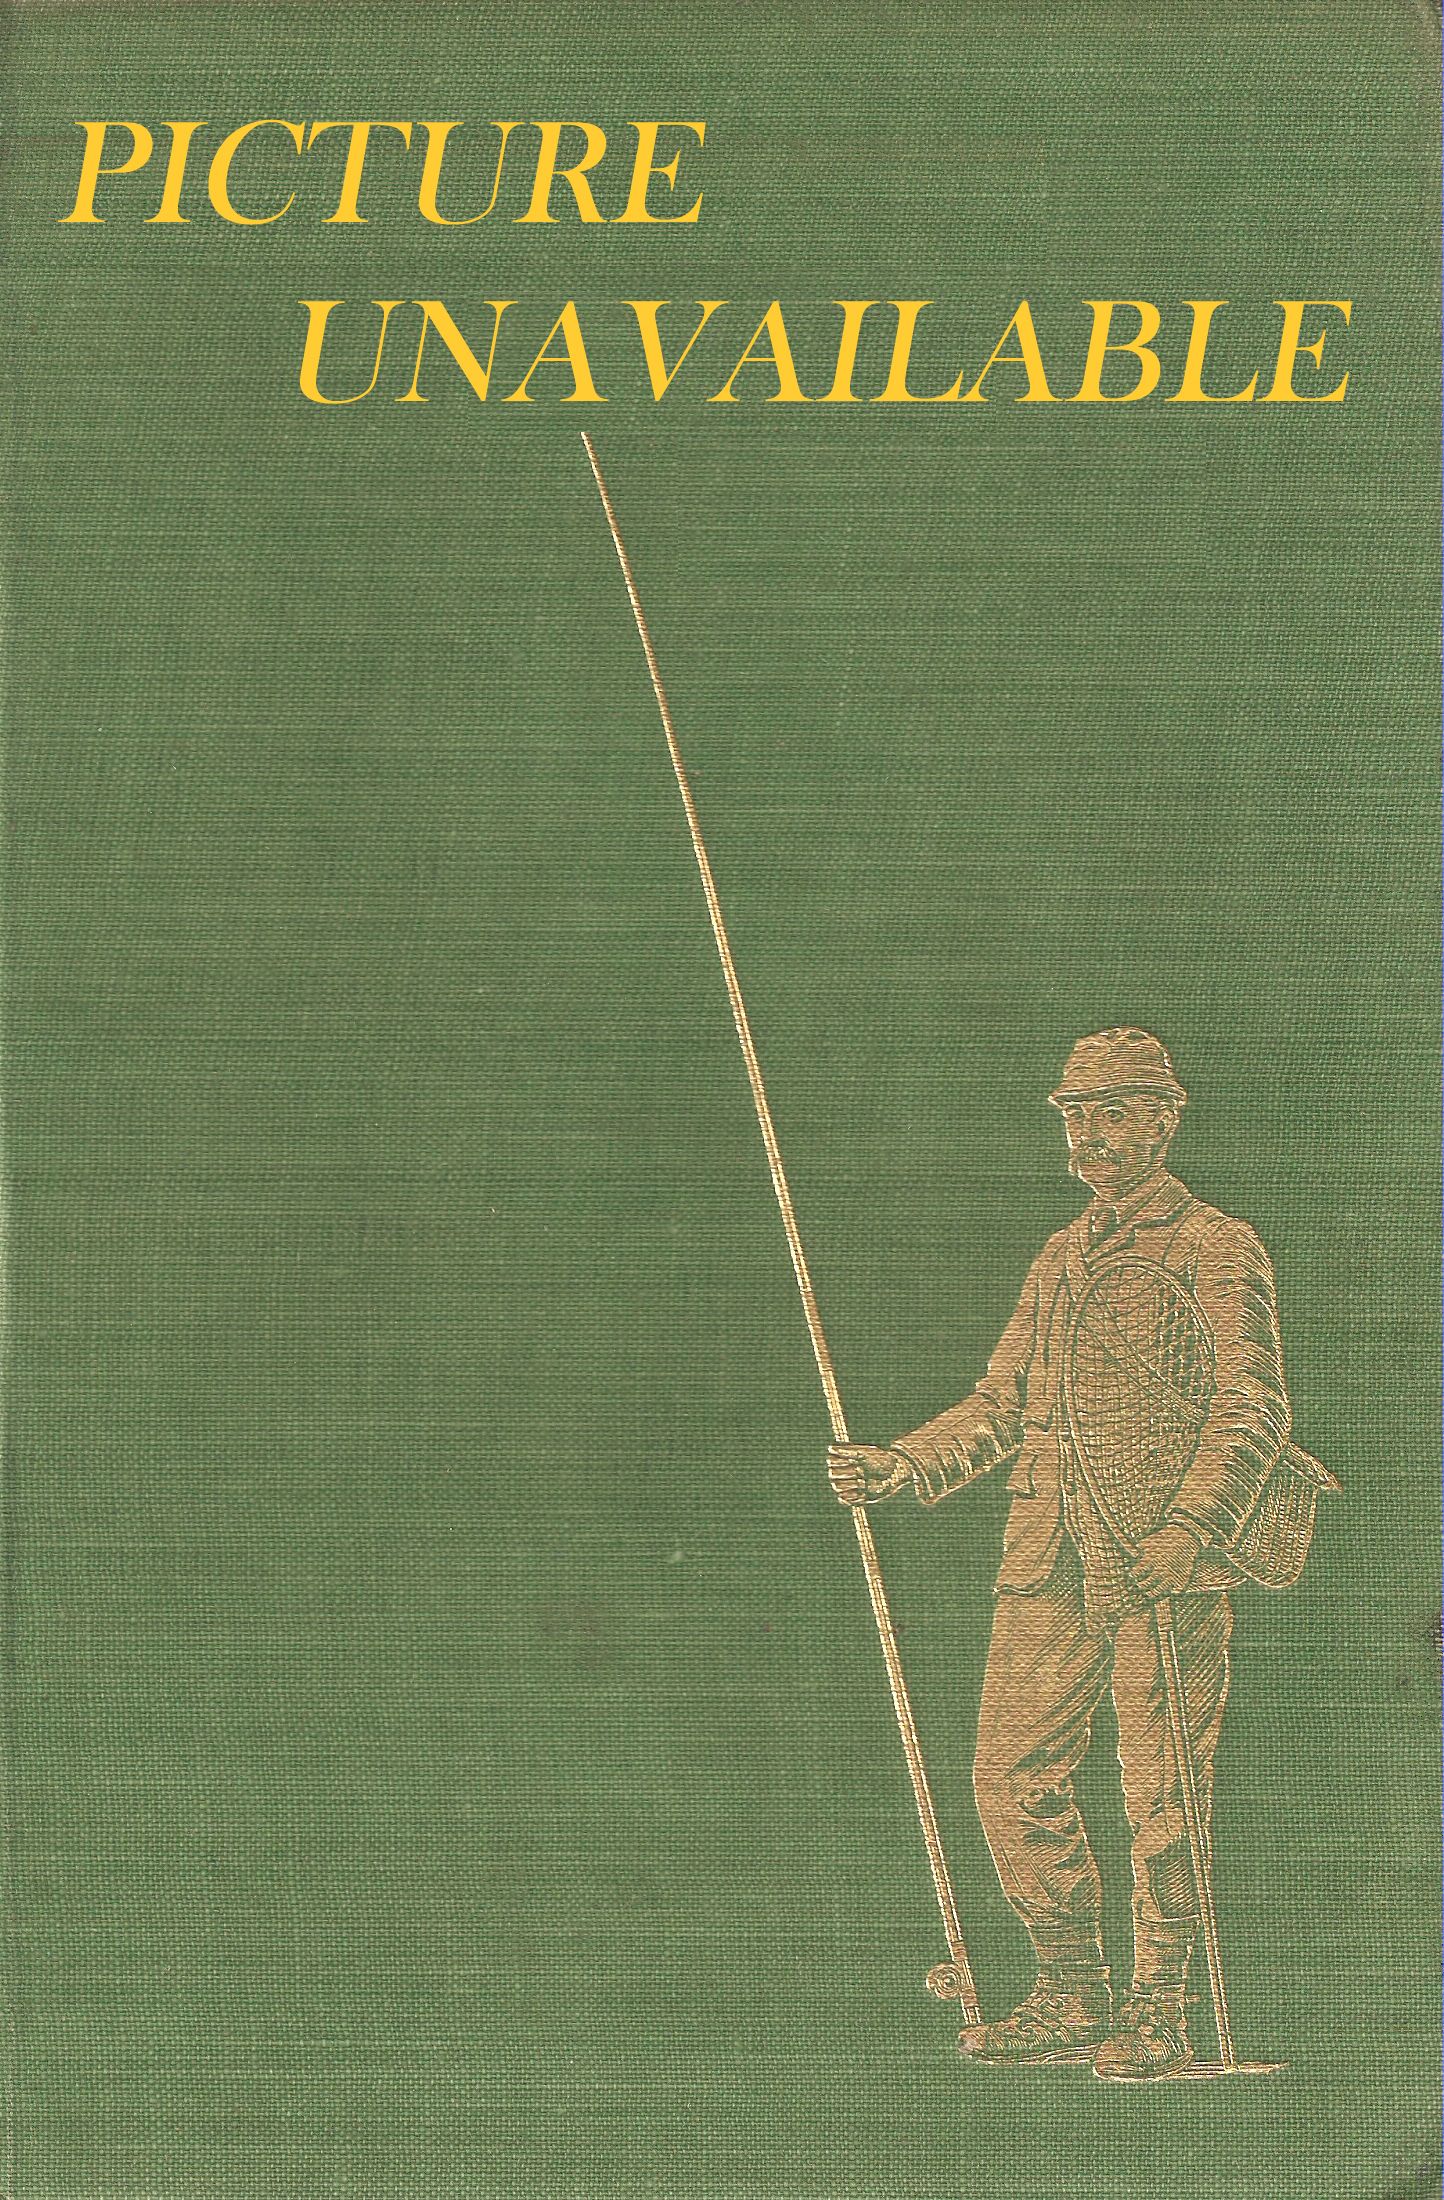 fishing basics the complete illustrated guide pdf